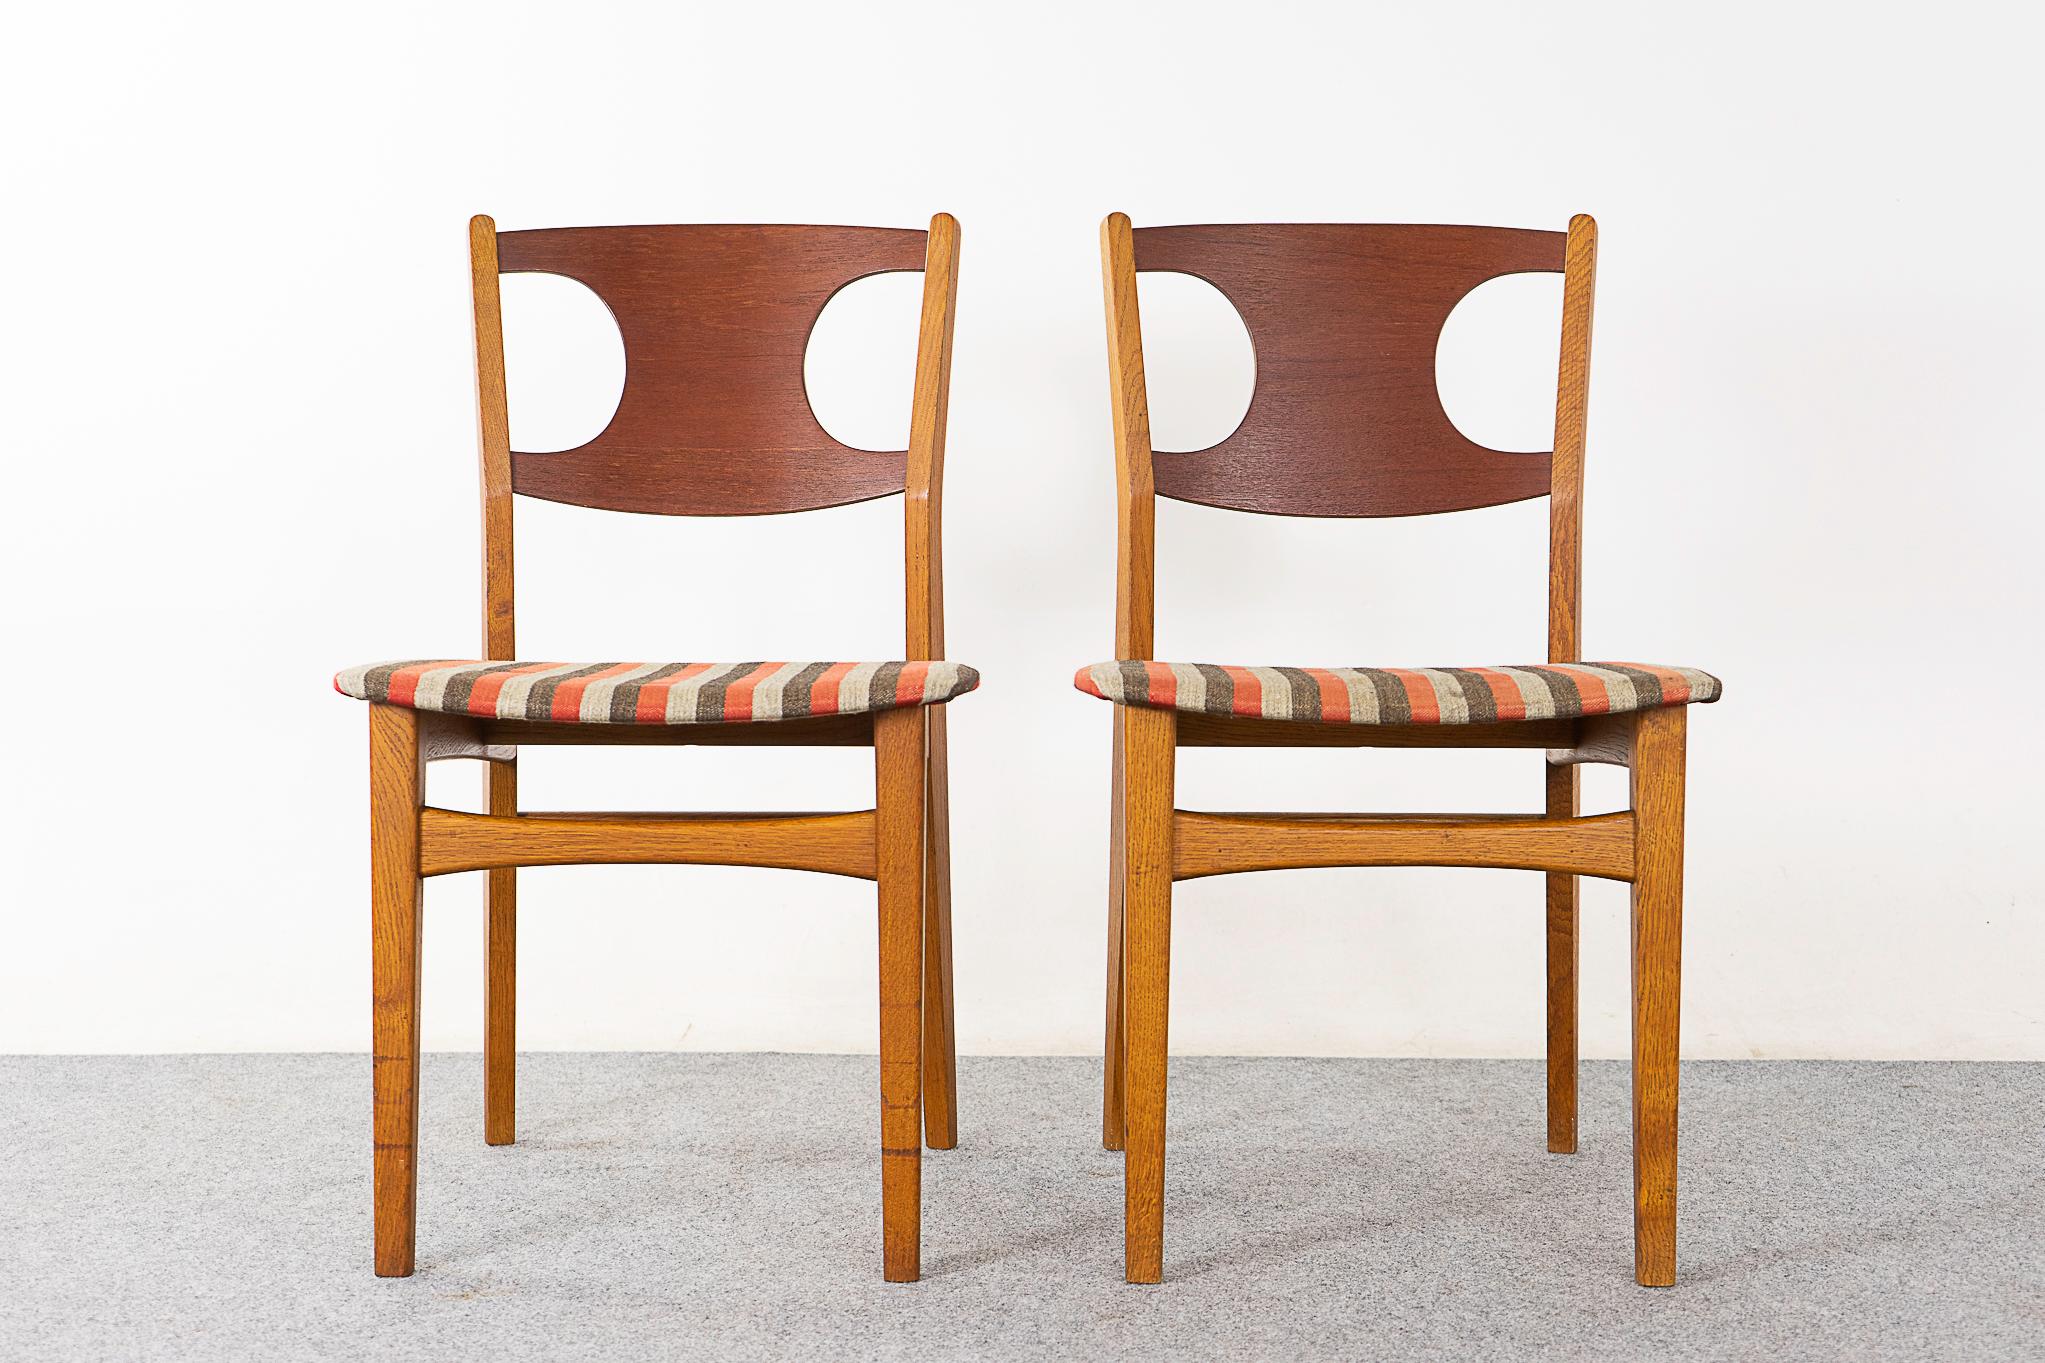 Teak and oak dining chair pair by Paul Rasmussen, circa 1960's. Unique cutout design on the teak curved backrests, robust solid oak frame with bowtie cross bars. Original fabric with wear & tear, removable seat pad makes reupholstering a snap! 